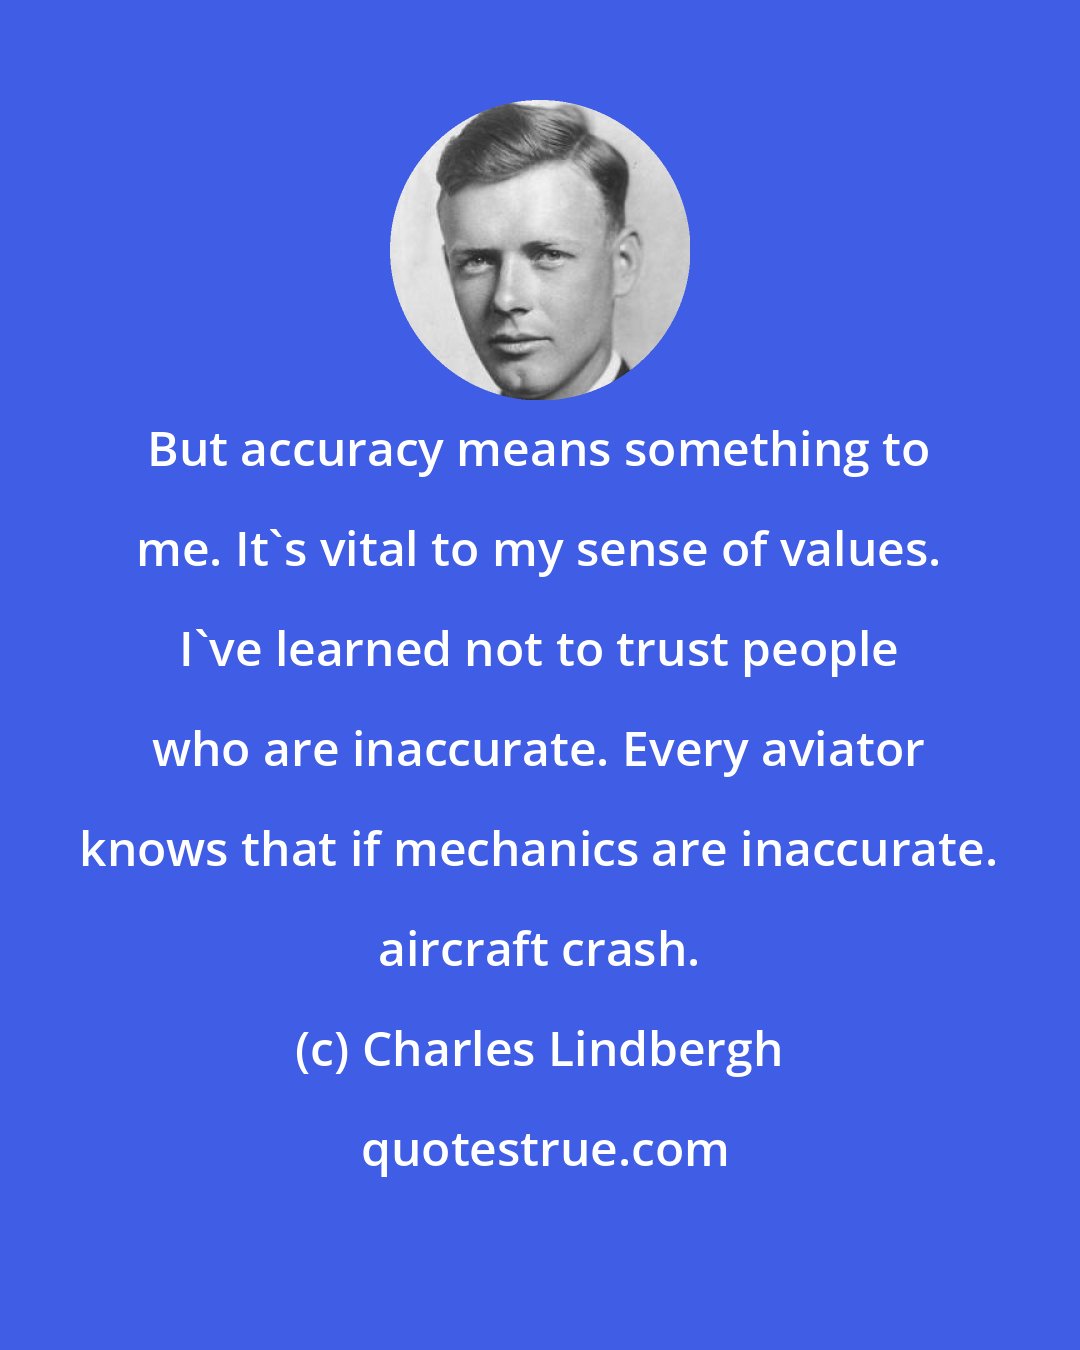 Charles Lindbergh: But accuracy means something to me. It's vital to my sense of values. I've learned not to trust people who are inaccurate. Every aviator knows that if mechanics are inaccurate. aircraft crash.